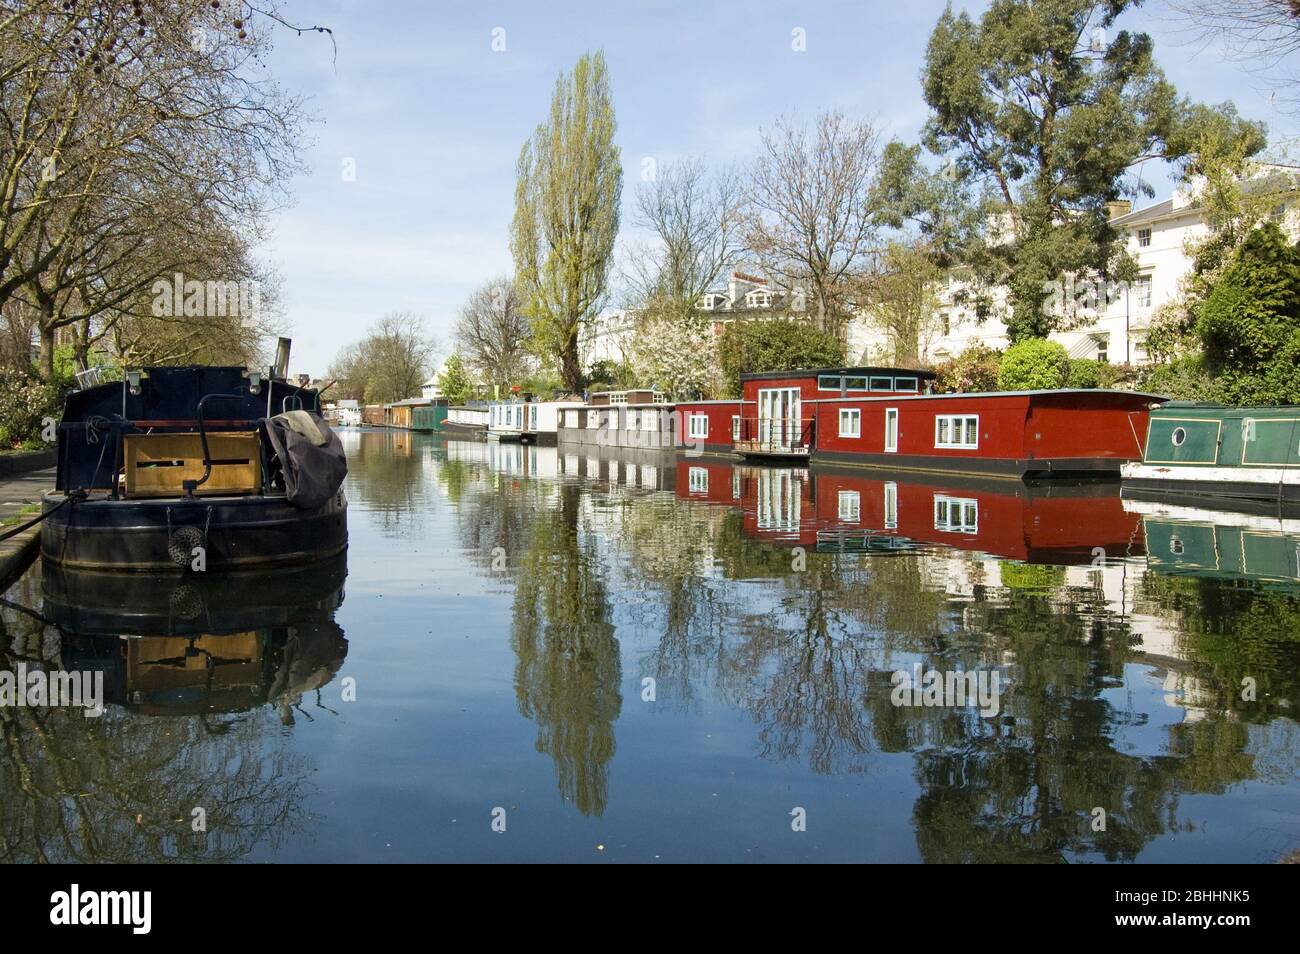 Rows of houseboats and narrow boats on the canal banks at Little Venice, Paddington, West London. The Grand Union Canal meets the Regent's Canal here. Stock Photo